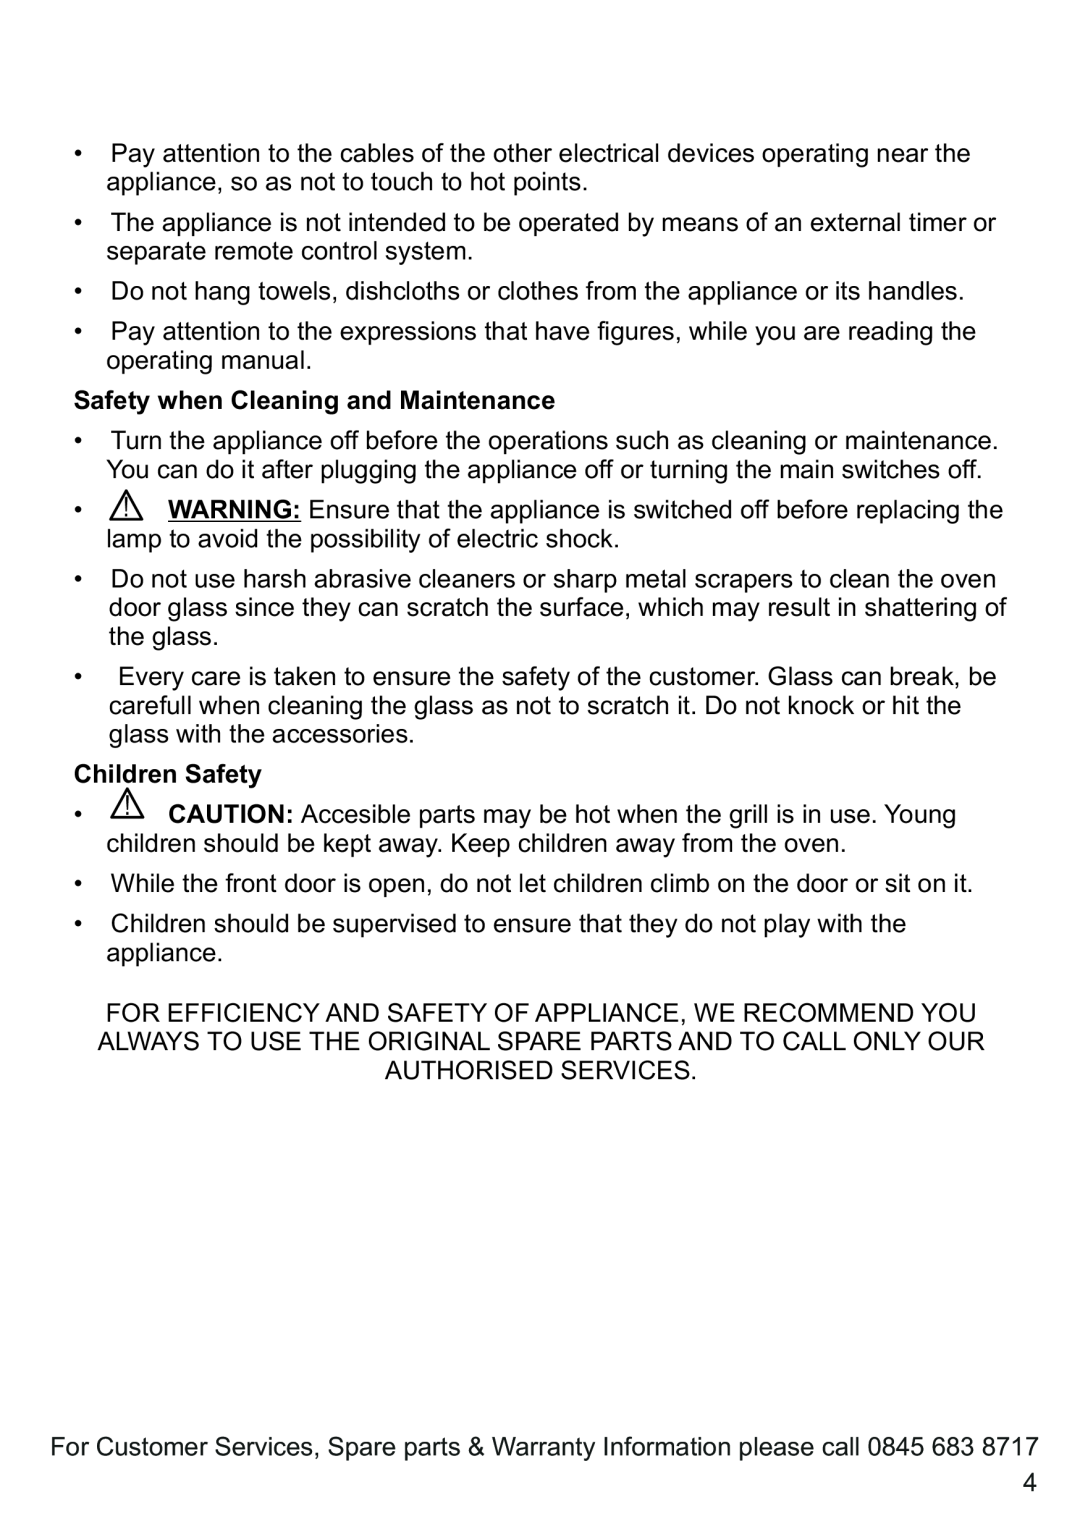 Russell Hobbs RHGC1 instruction manual Safety when Cleaning and Maintenance, Children Safety 